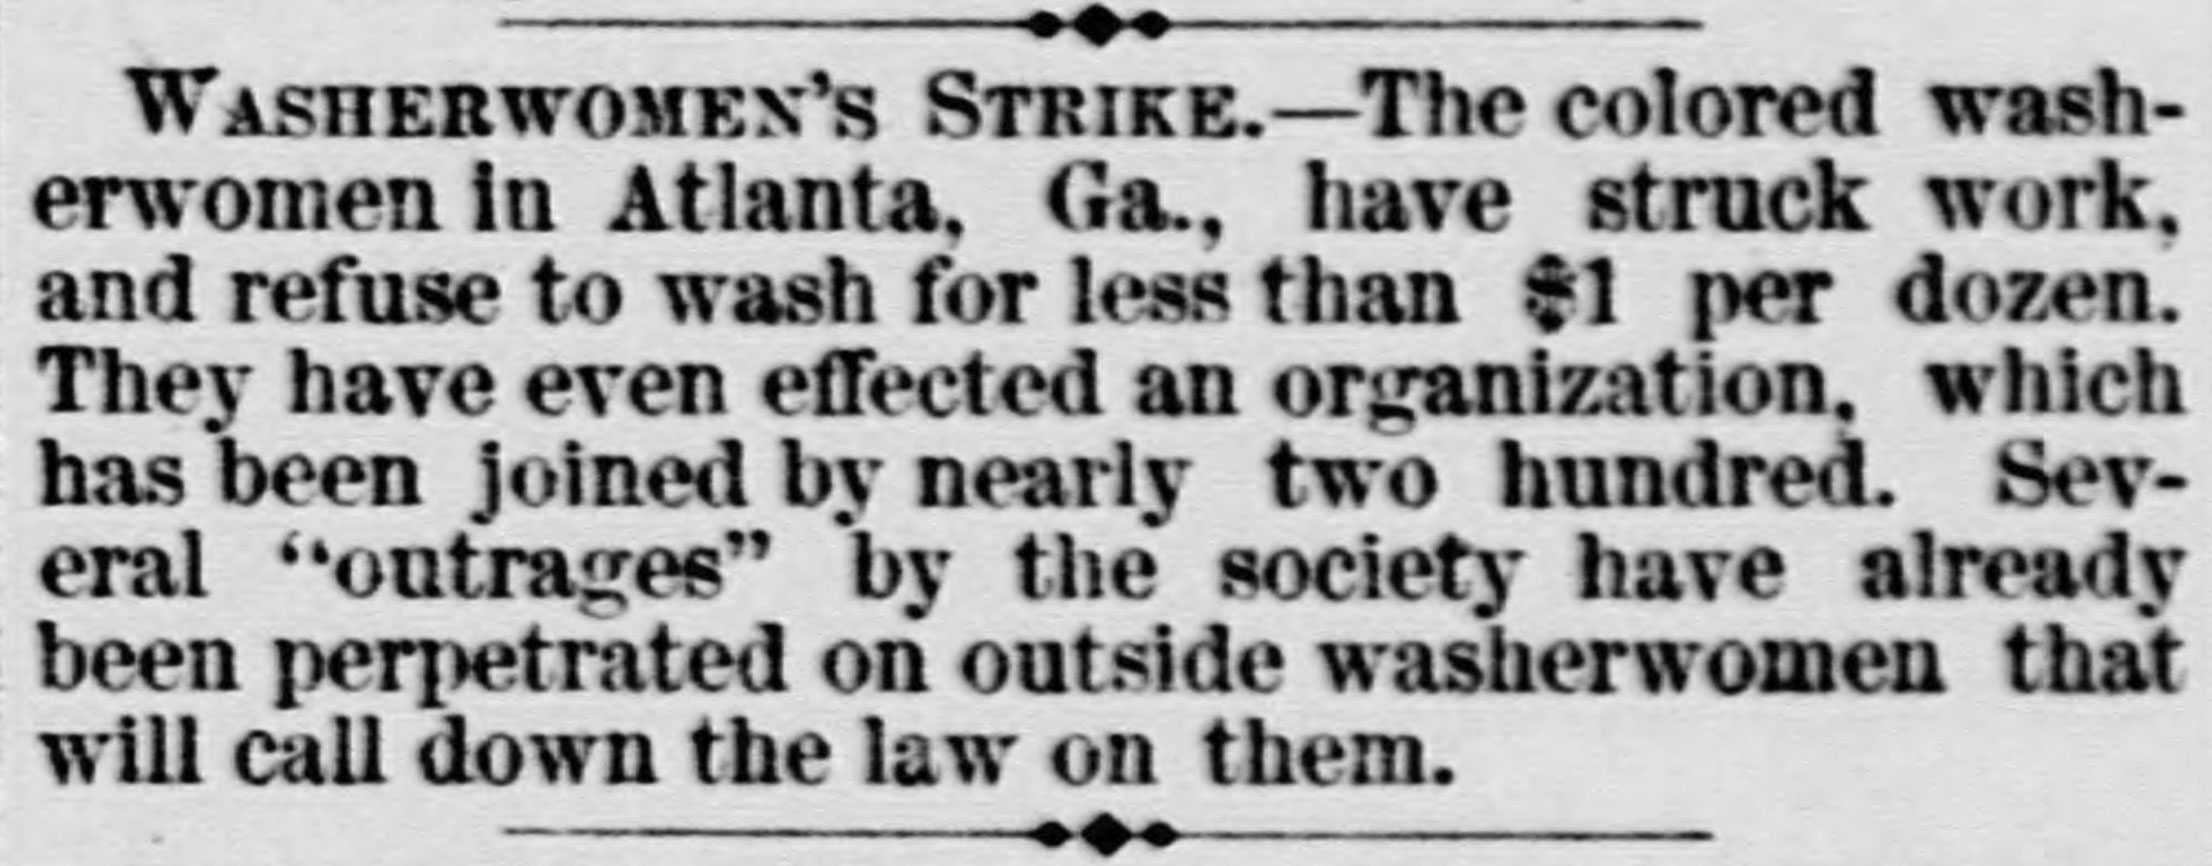 A clipping of a short paragraph from a newspaper that discusses the Washerwomen's Strike